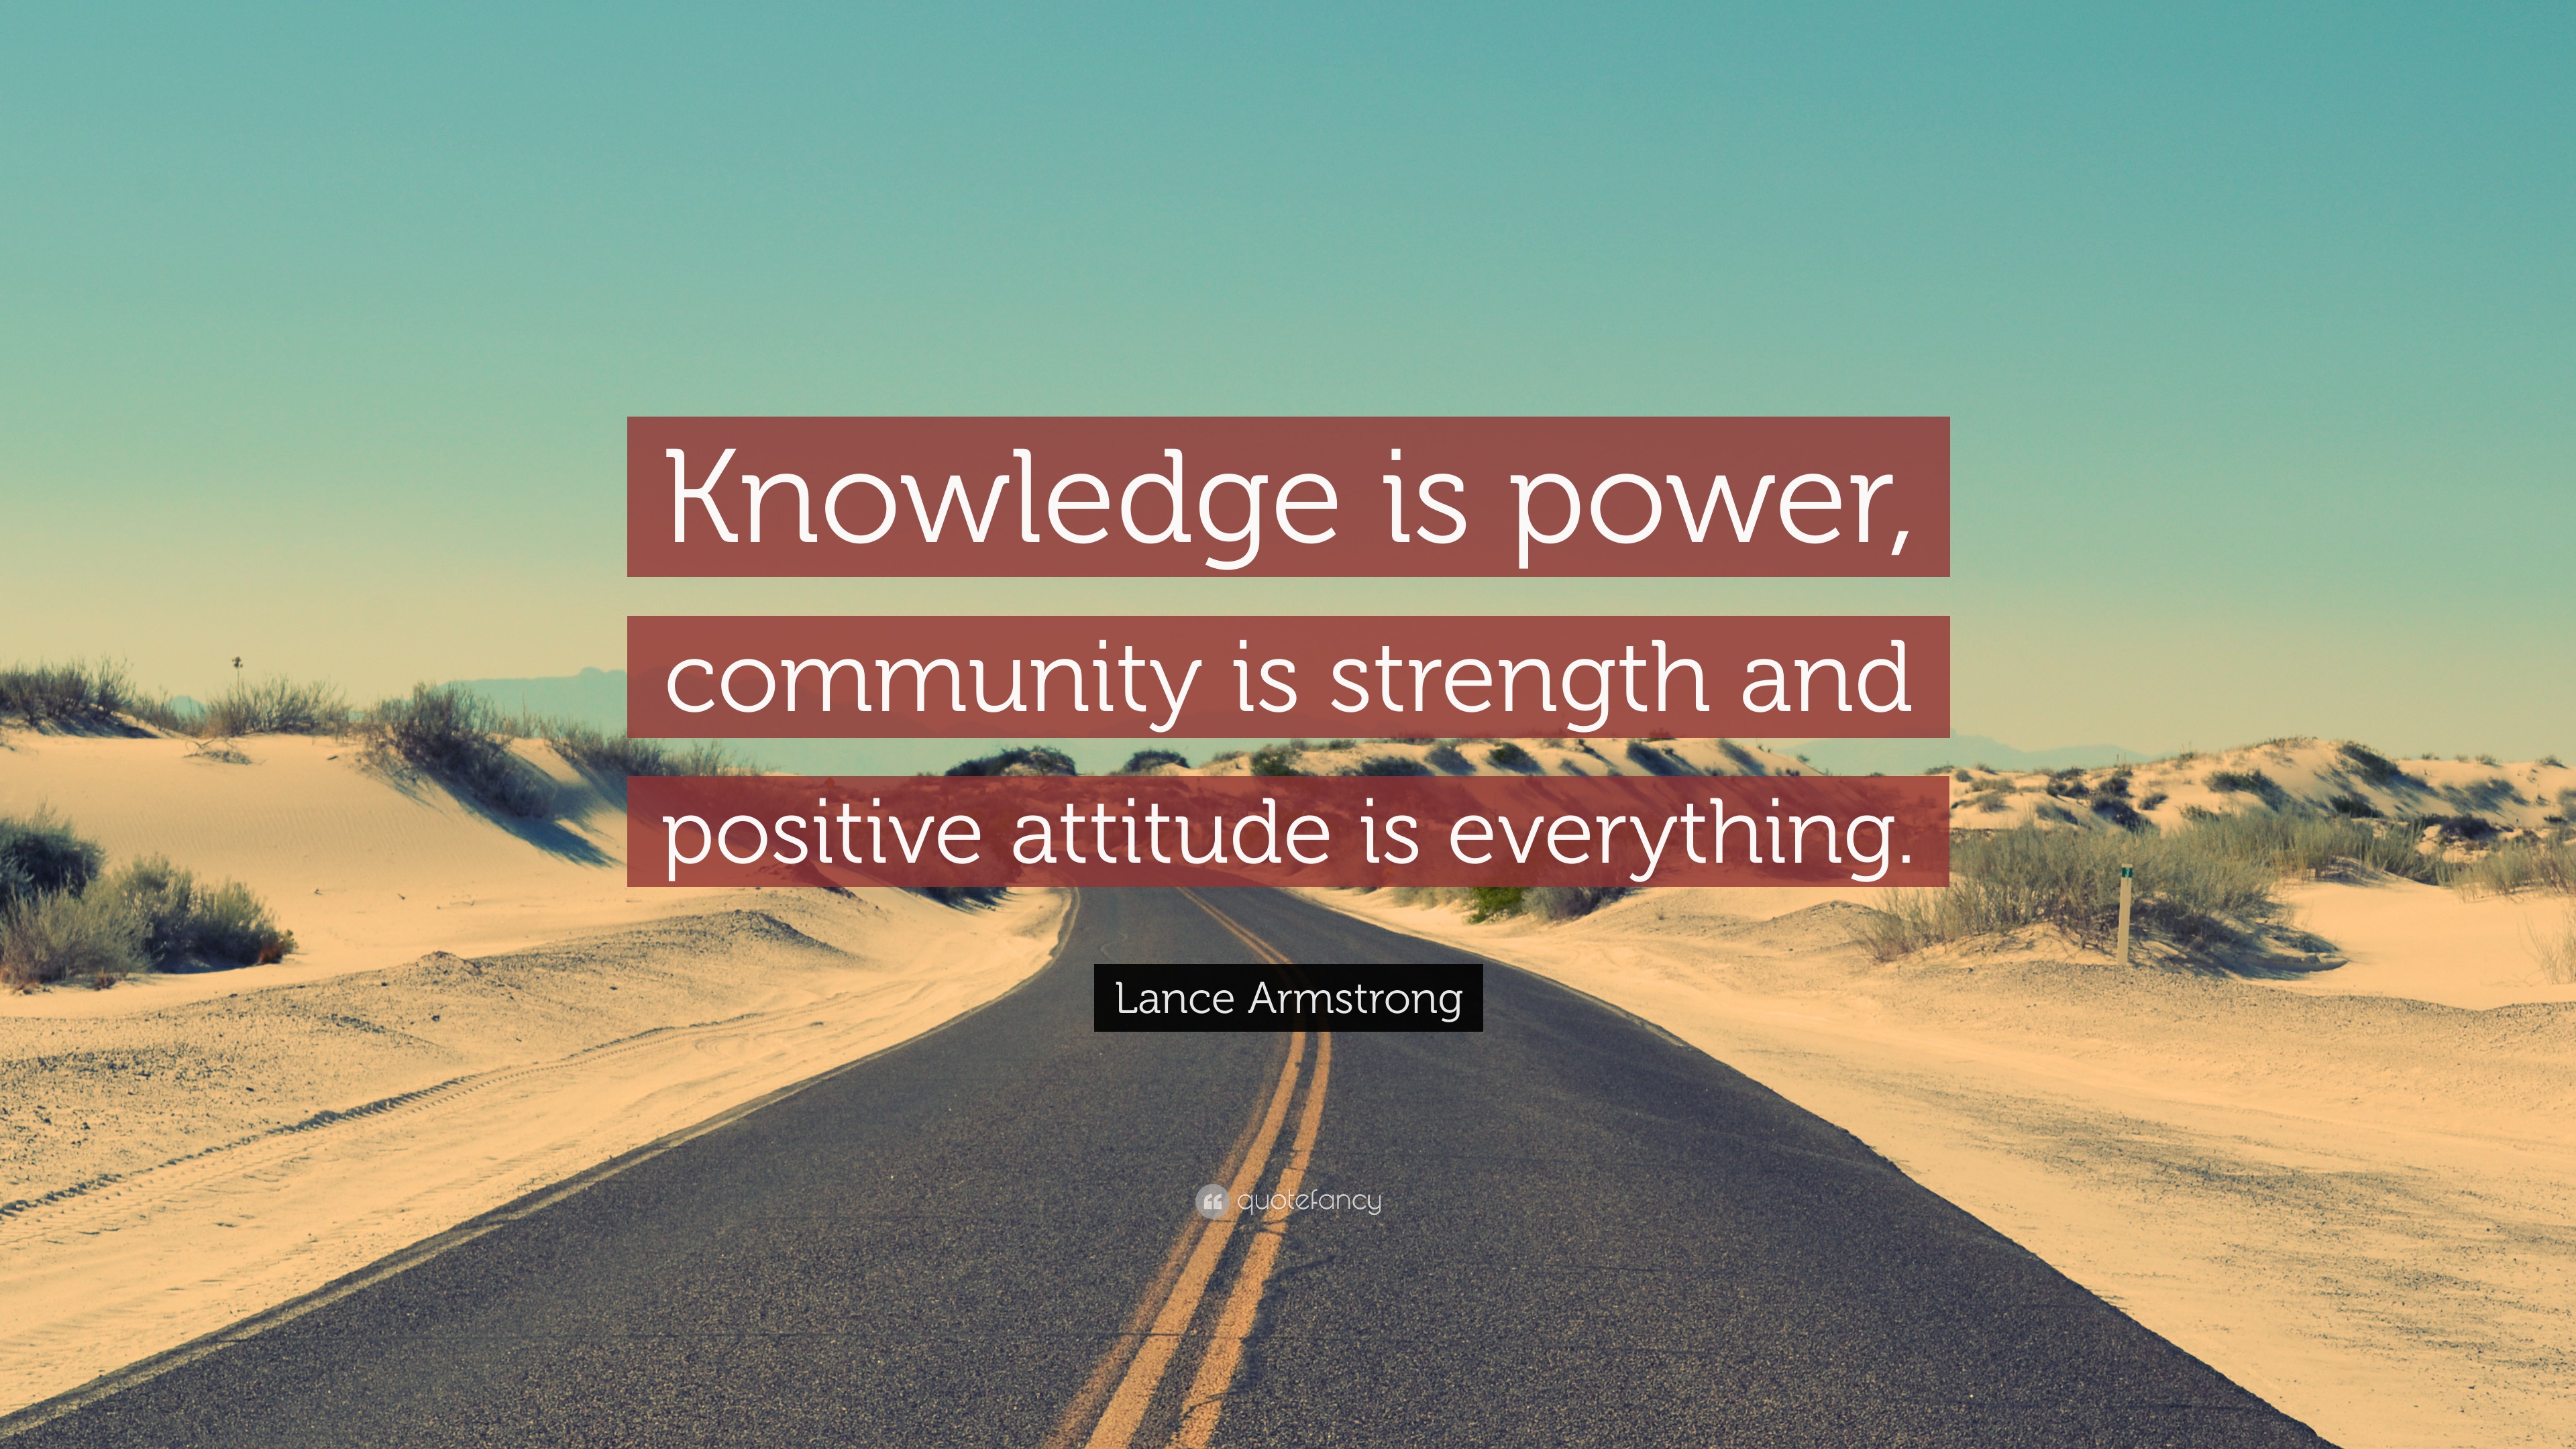 Lance Armstrong Quote “Knowledge is power, community is